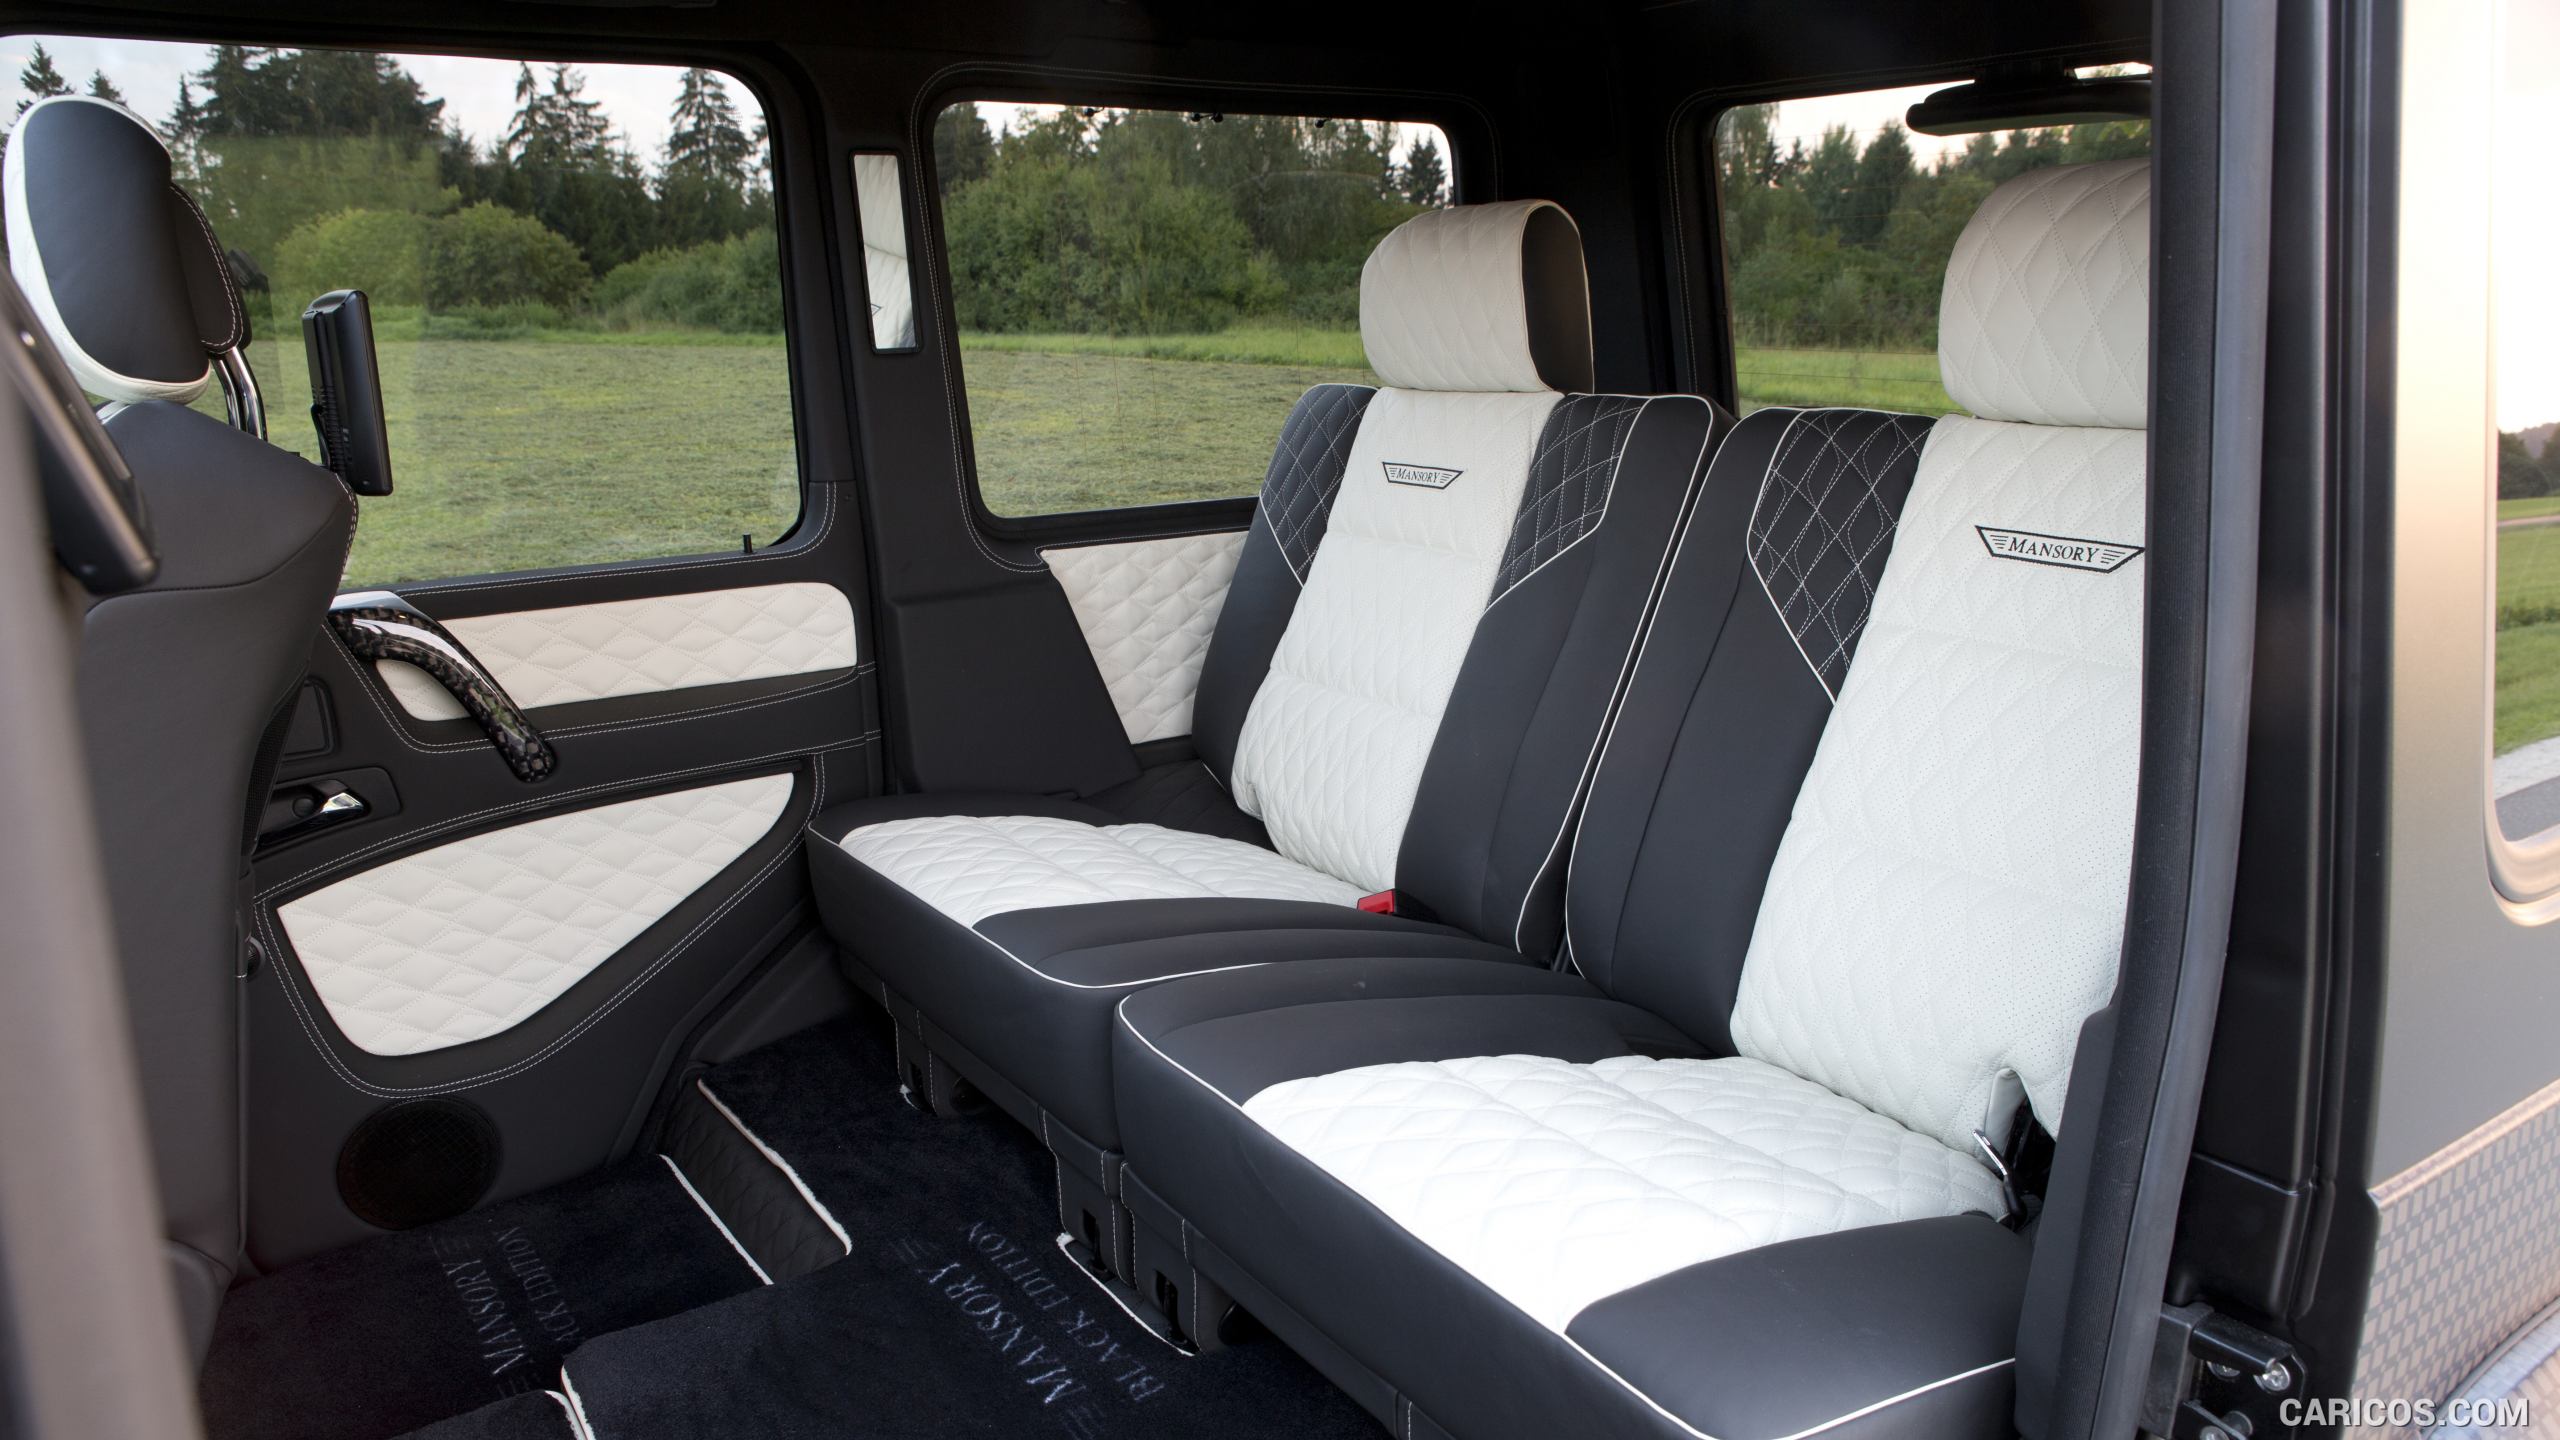 2016 MANSORY GRONOS Black Edition based on Mercedes G63 AMG - Interior Rear Seats, #15 of 16